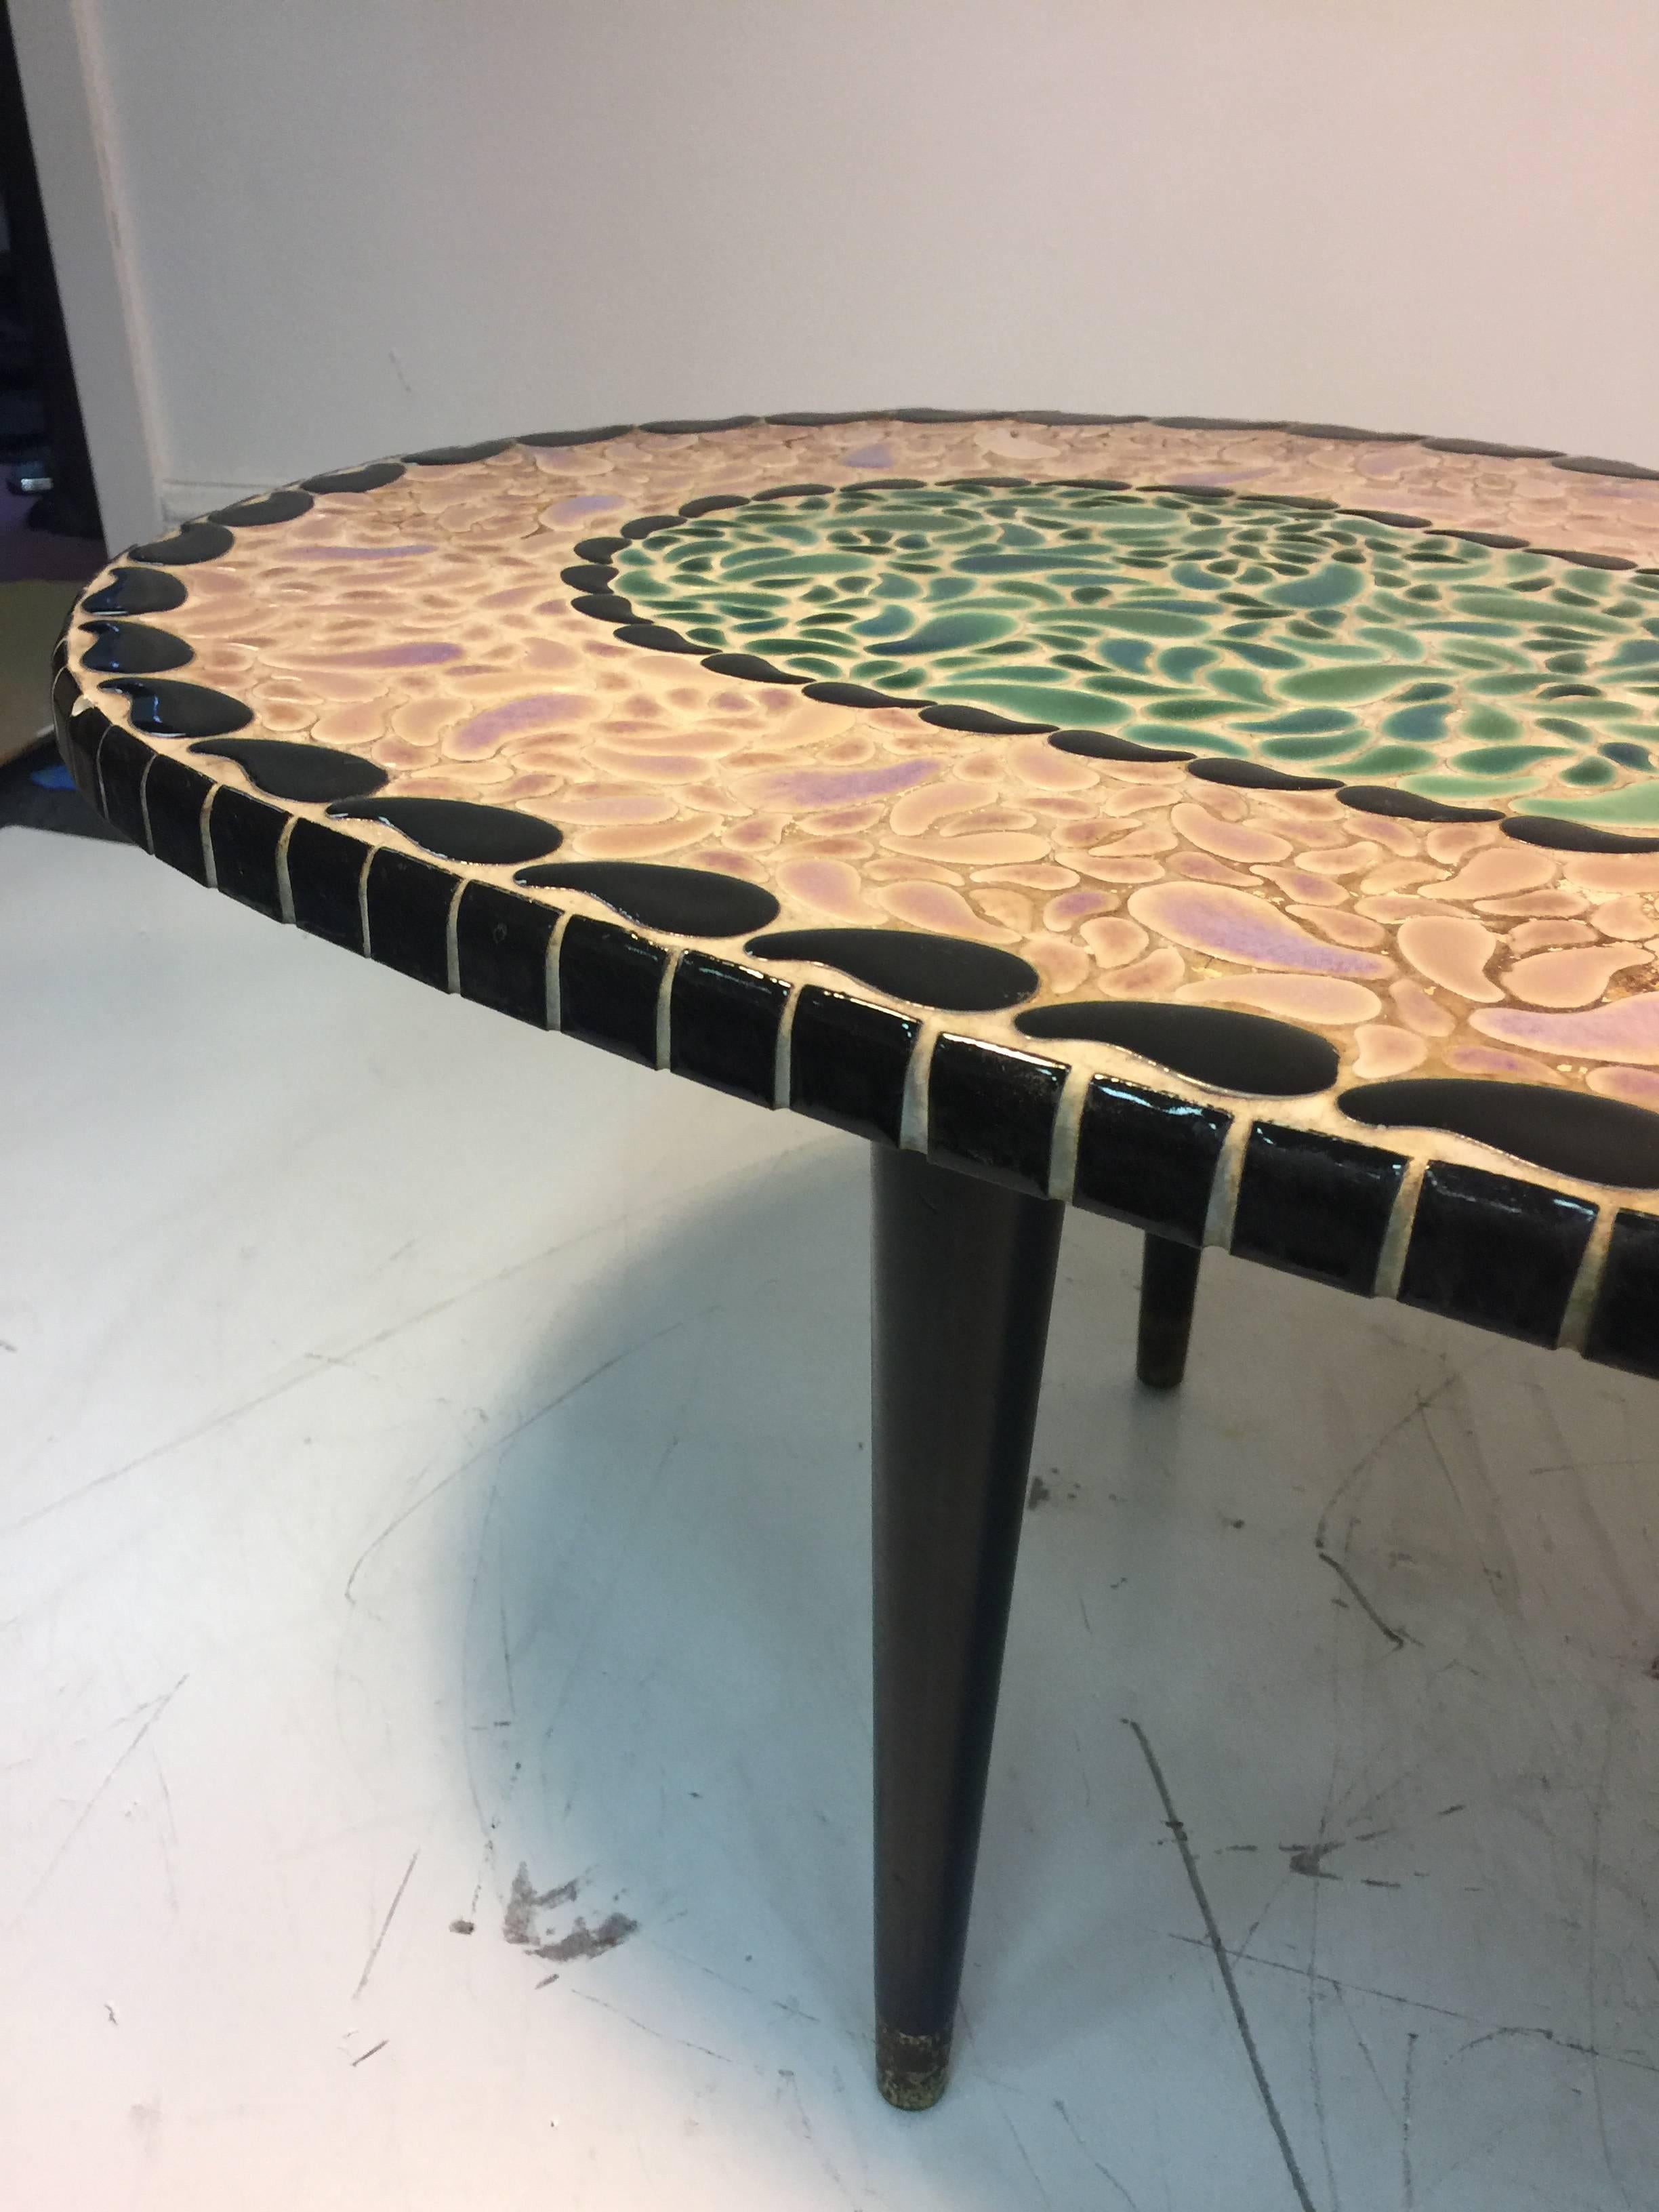 20th Century Magnificent Mosaic Tile Top Coffee Table in an Unusual Kidney Shape For Sale